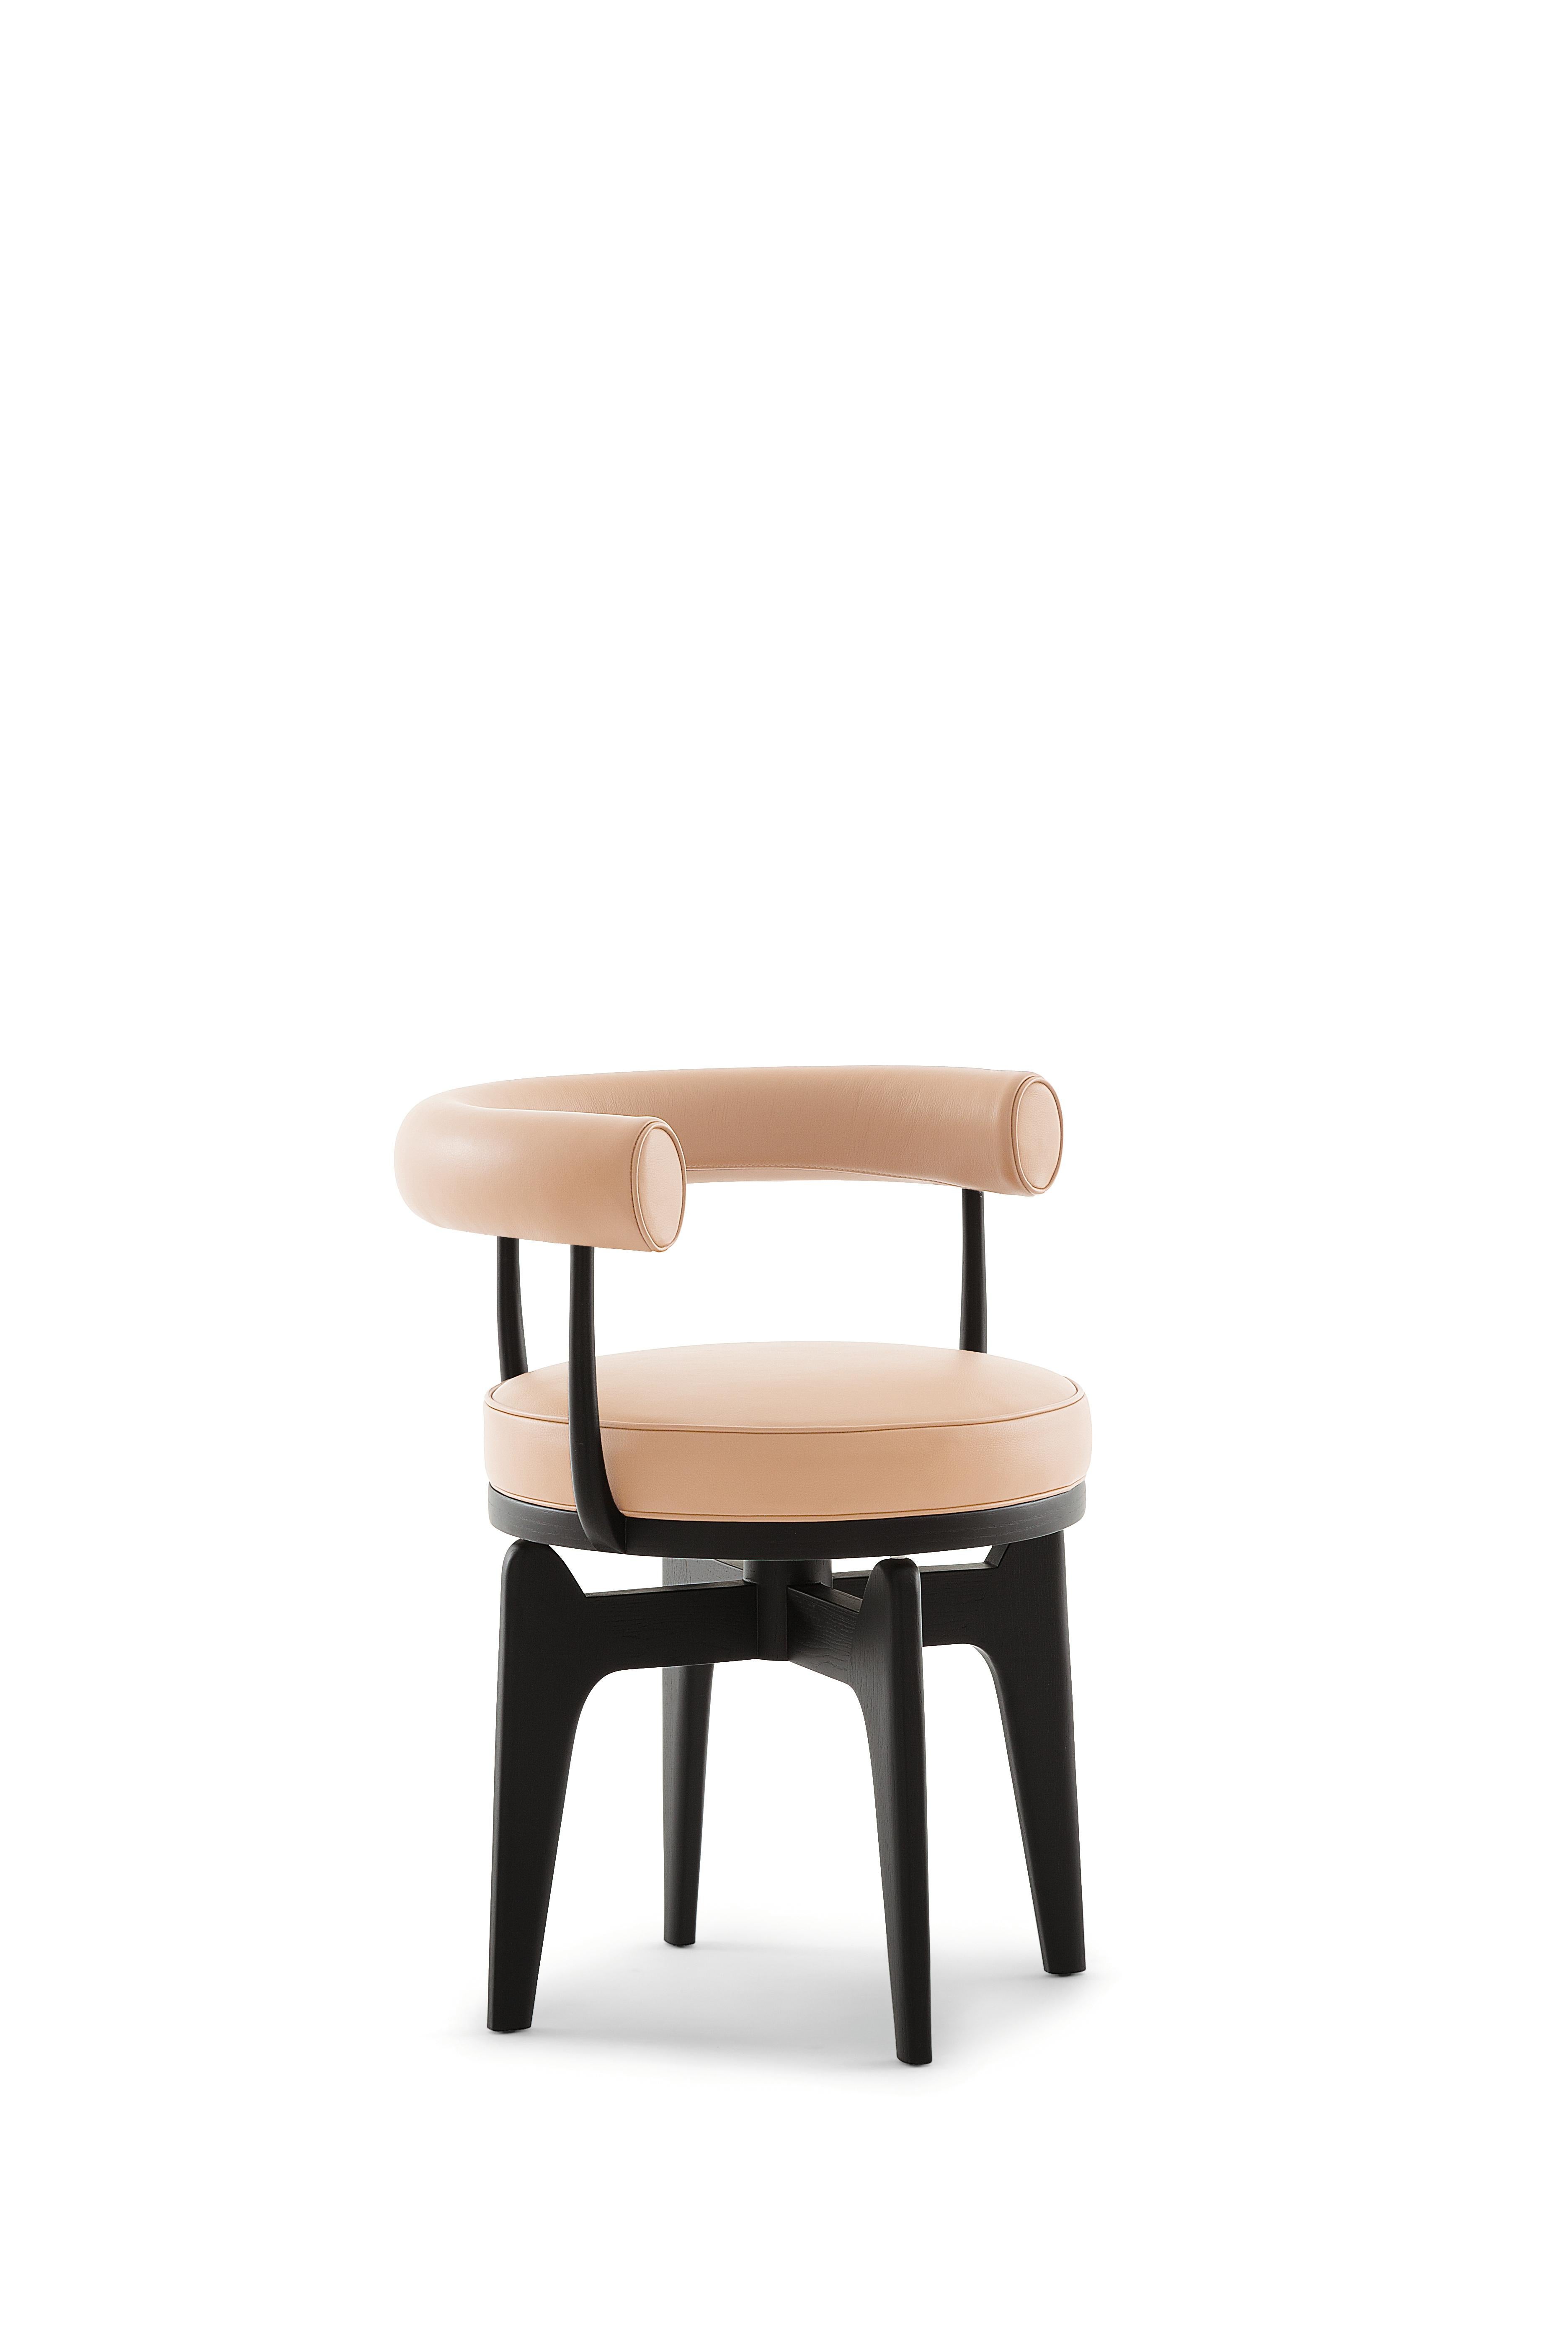 charlotte perriand indochine chair